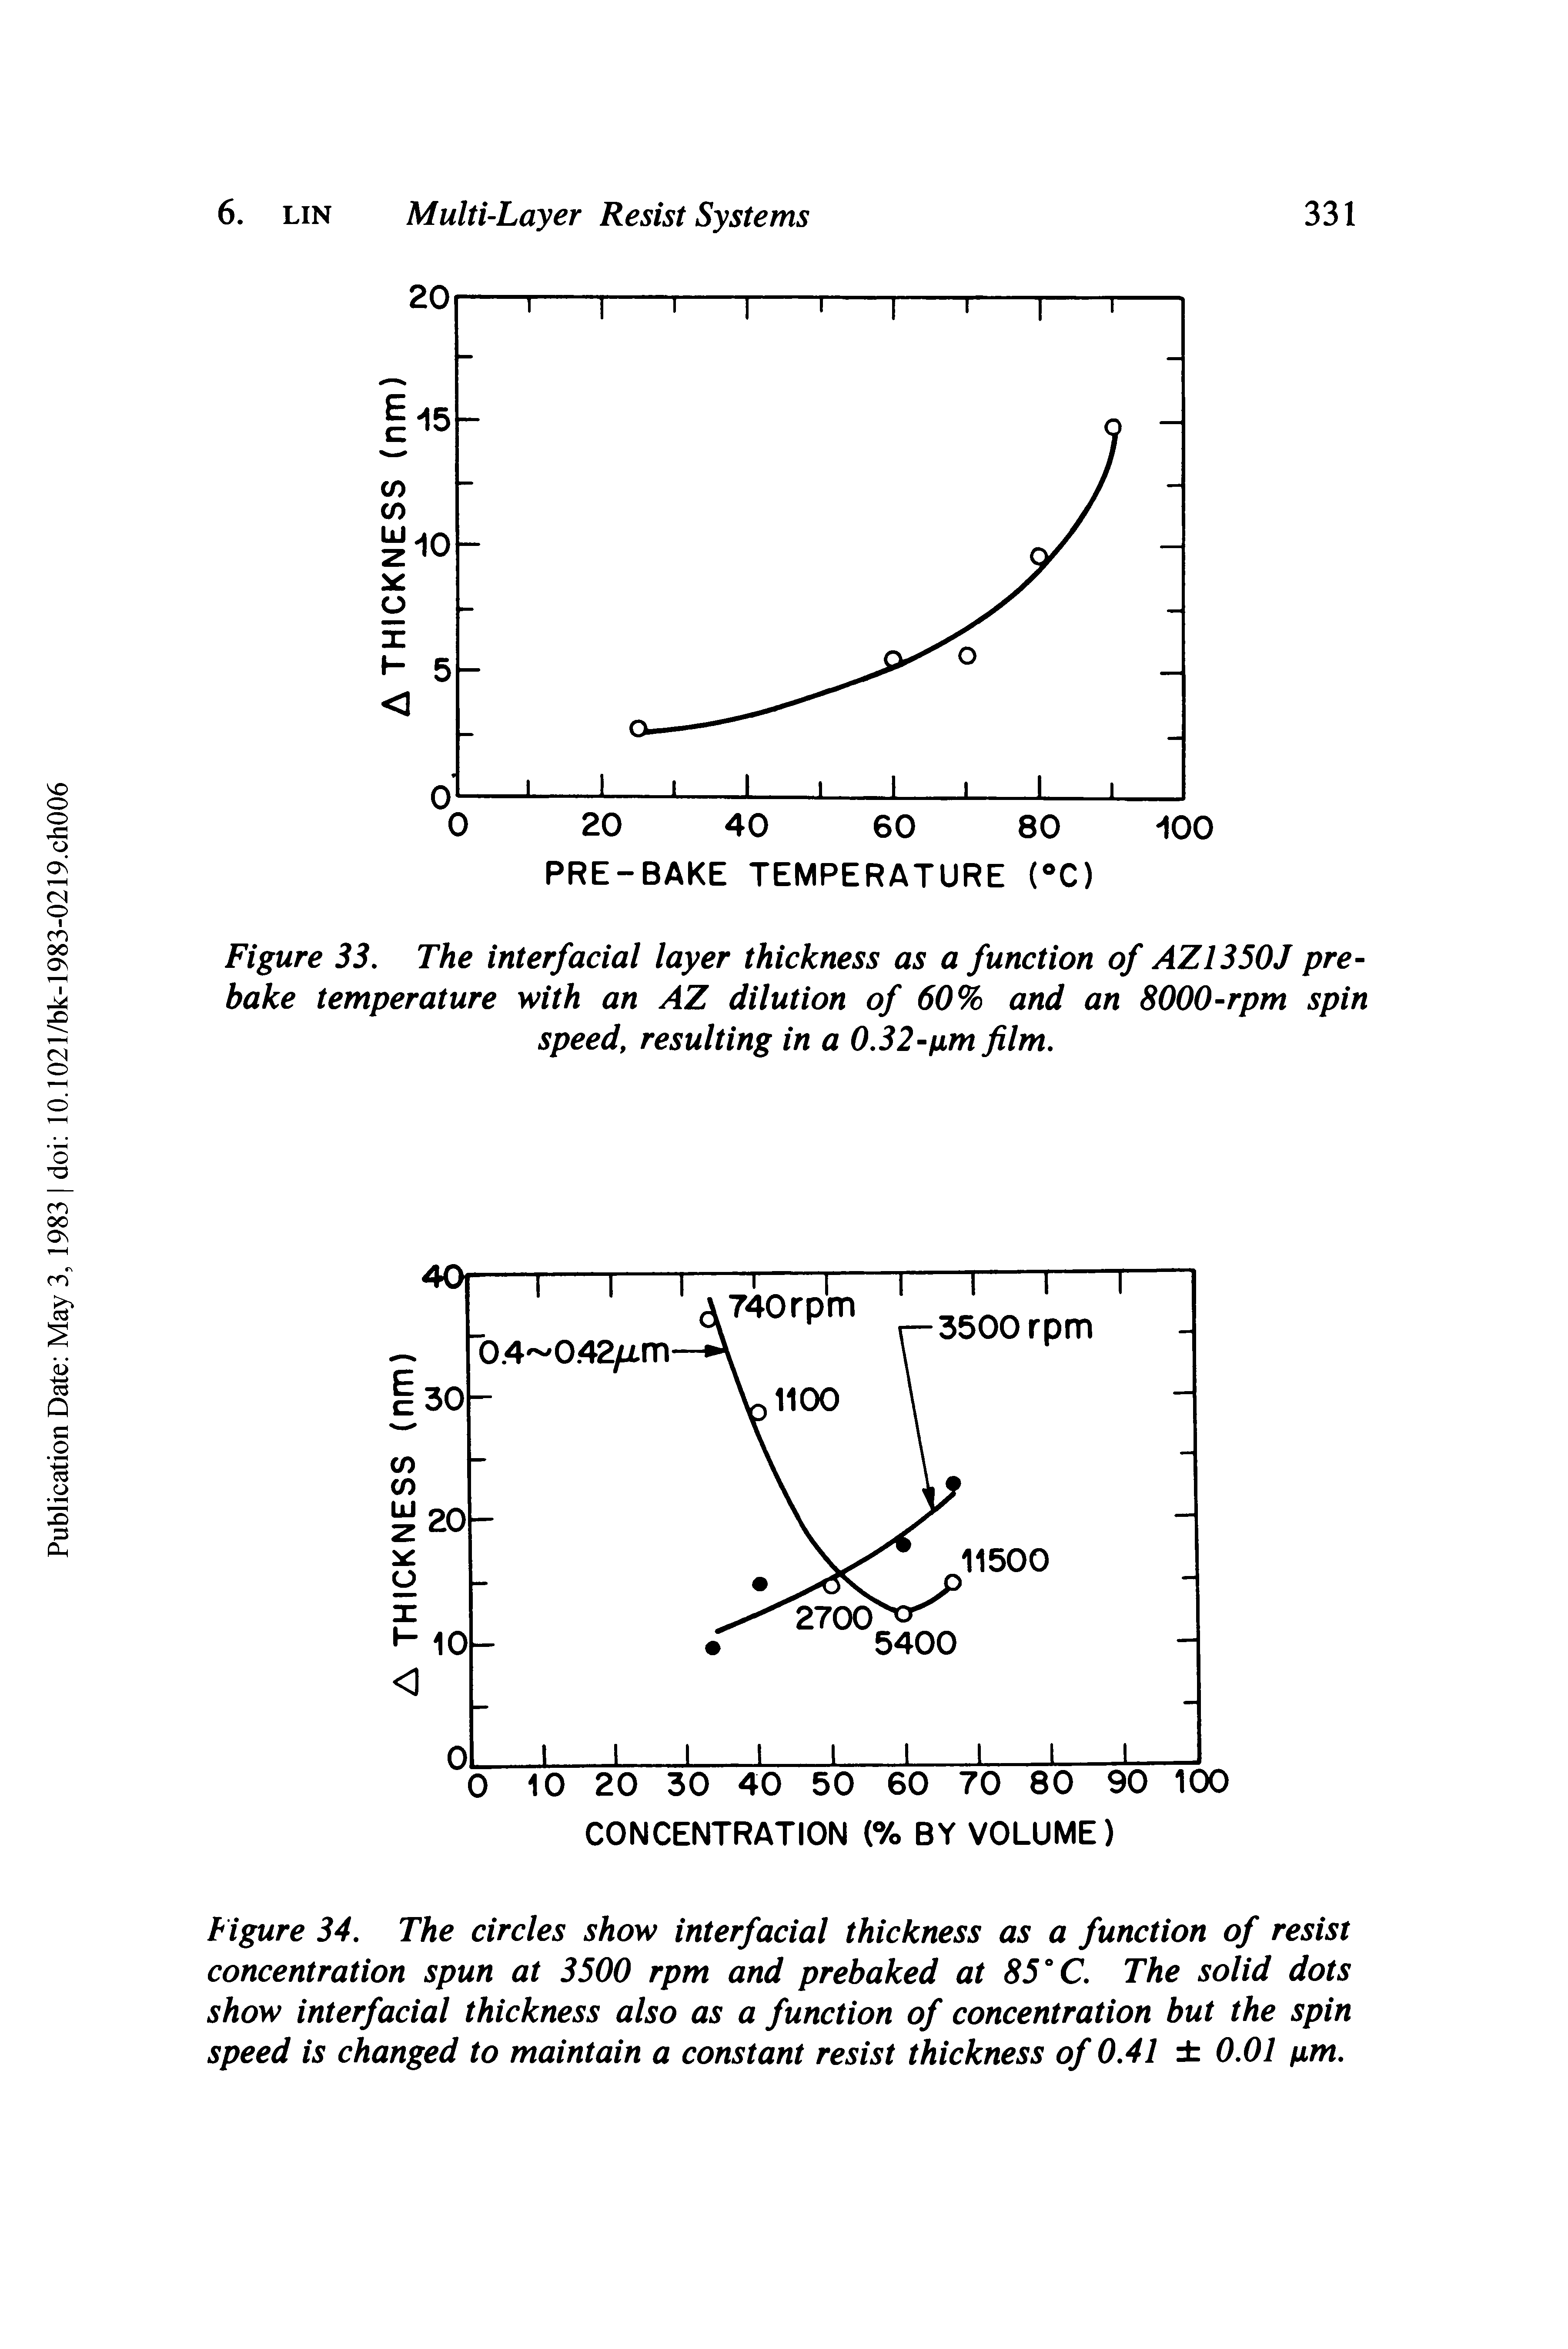 Figure 33. The interfacial layer thickness as a function of AZ1350J prebake temperature with an AZ dilution of 60% and an 8000-rpm spin speed, resulting in a 0.32-pm film.